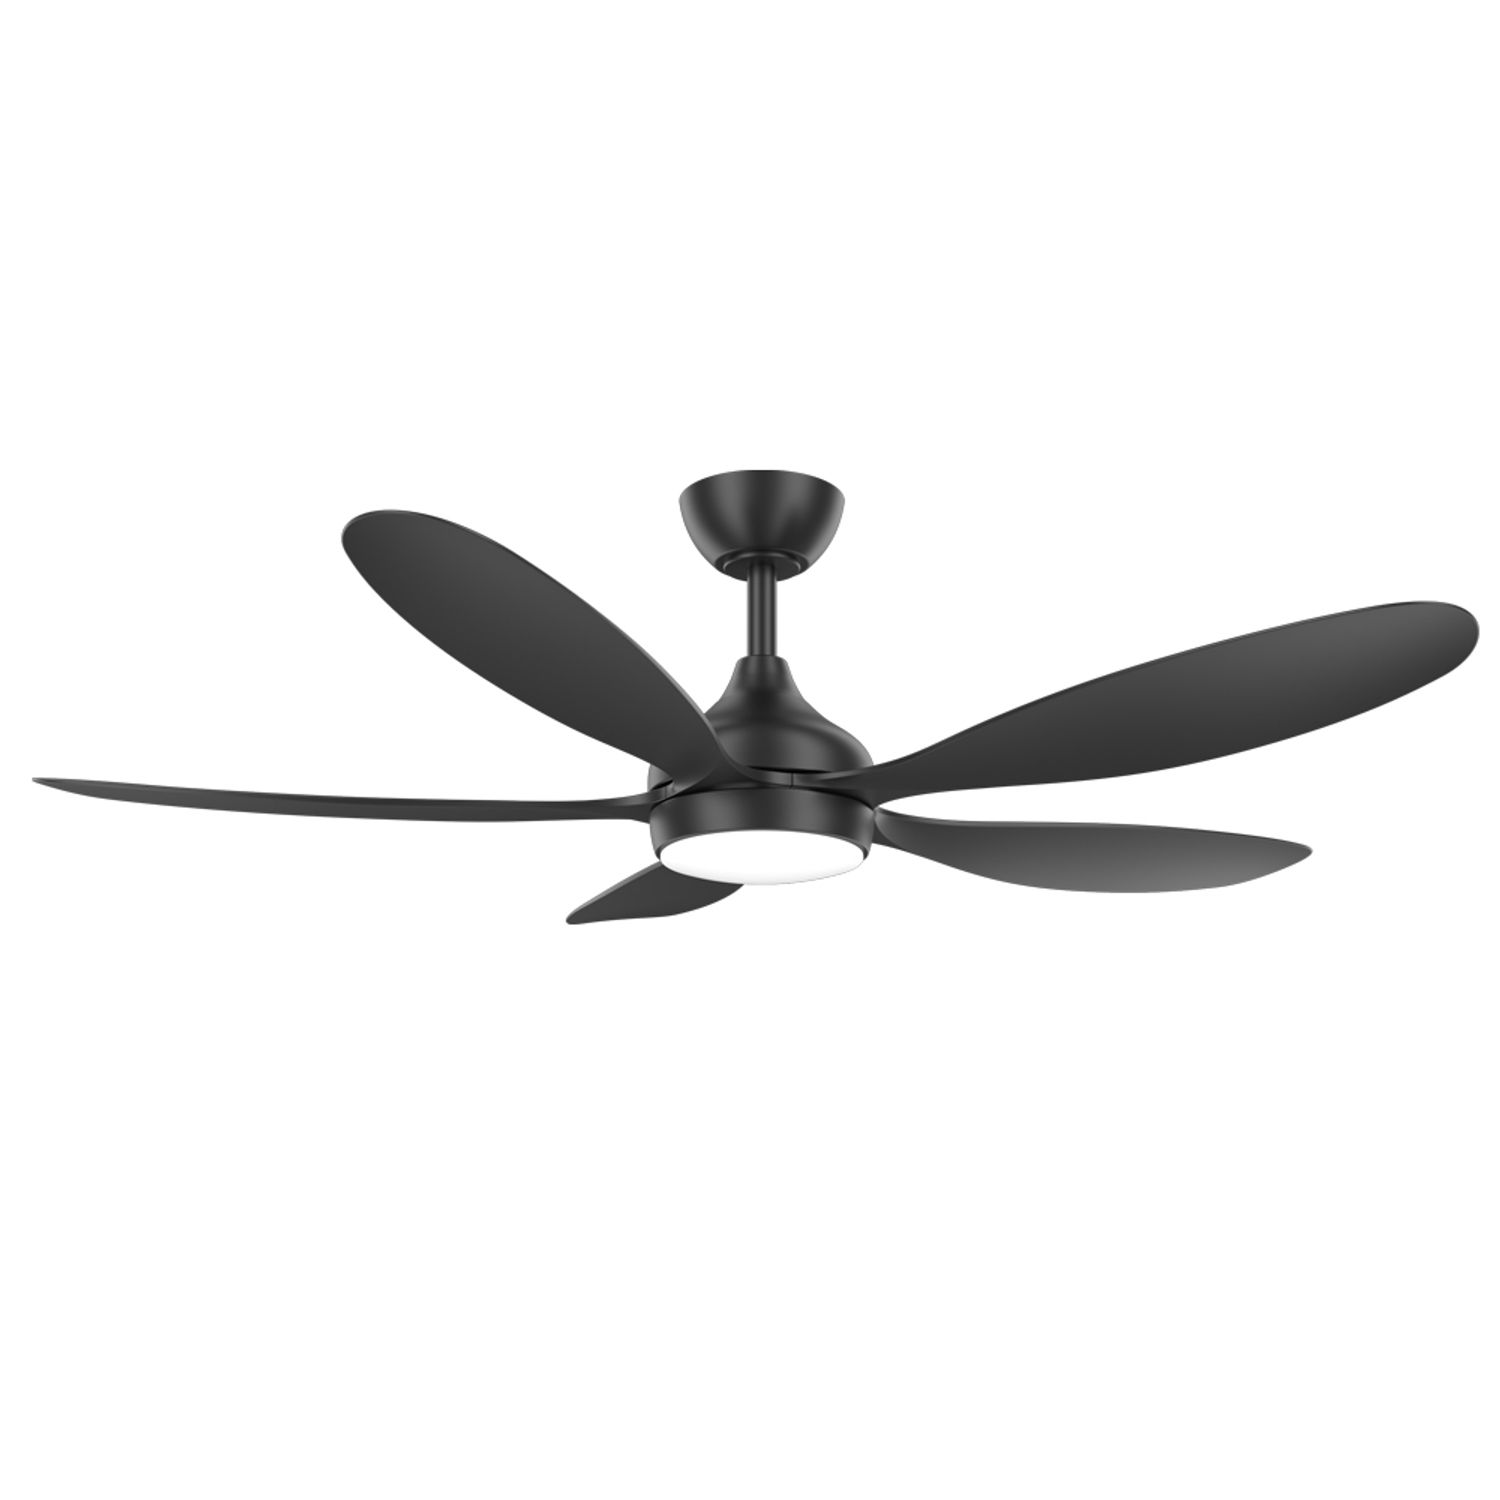 KBS all black modern ceiling fan with dimmable light and smartphone control